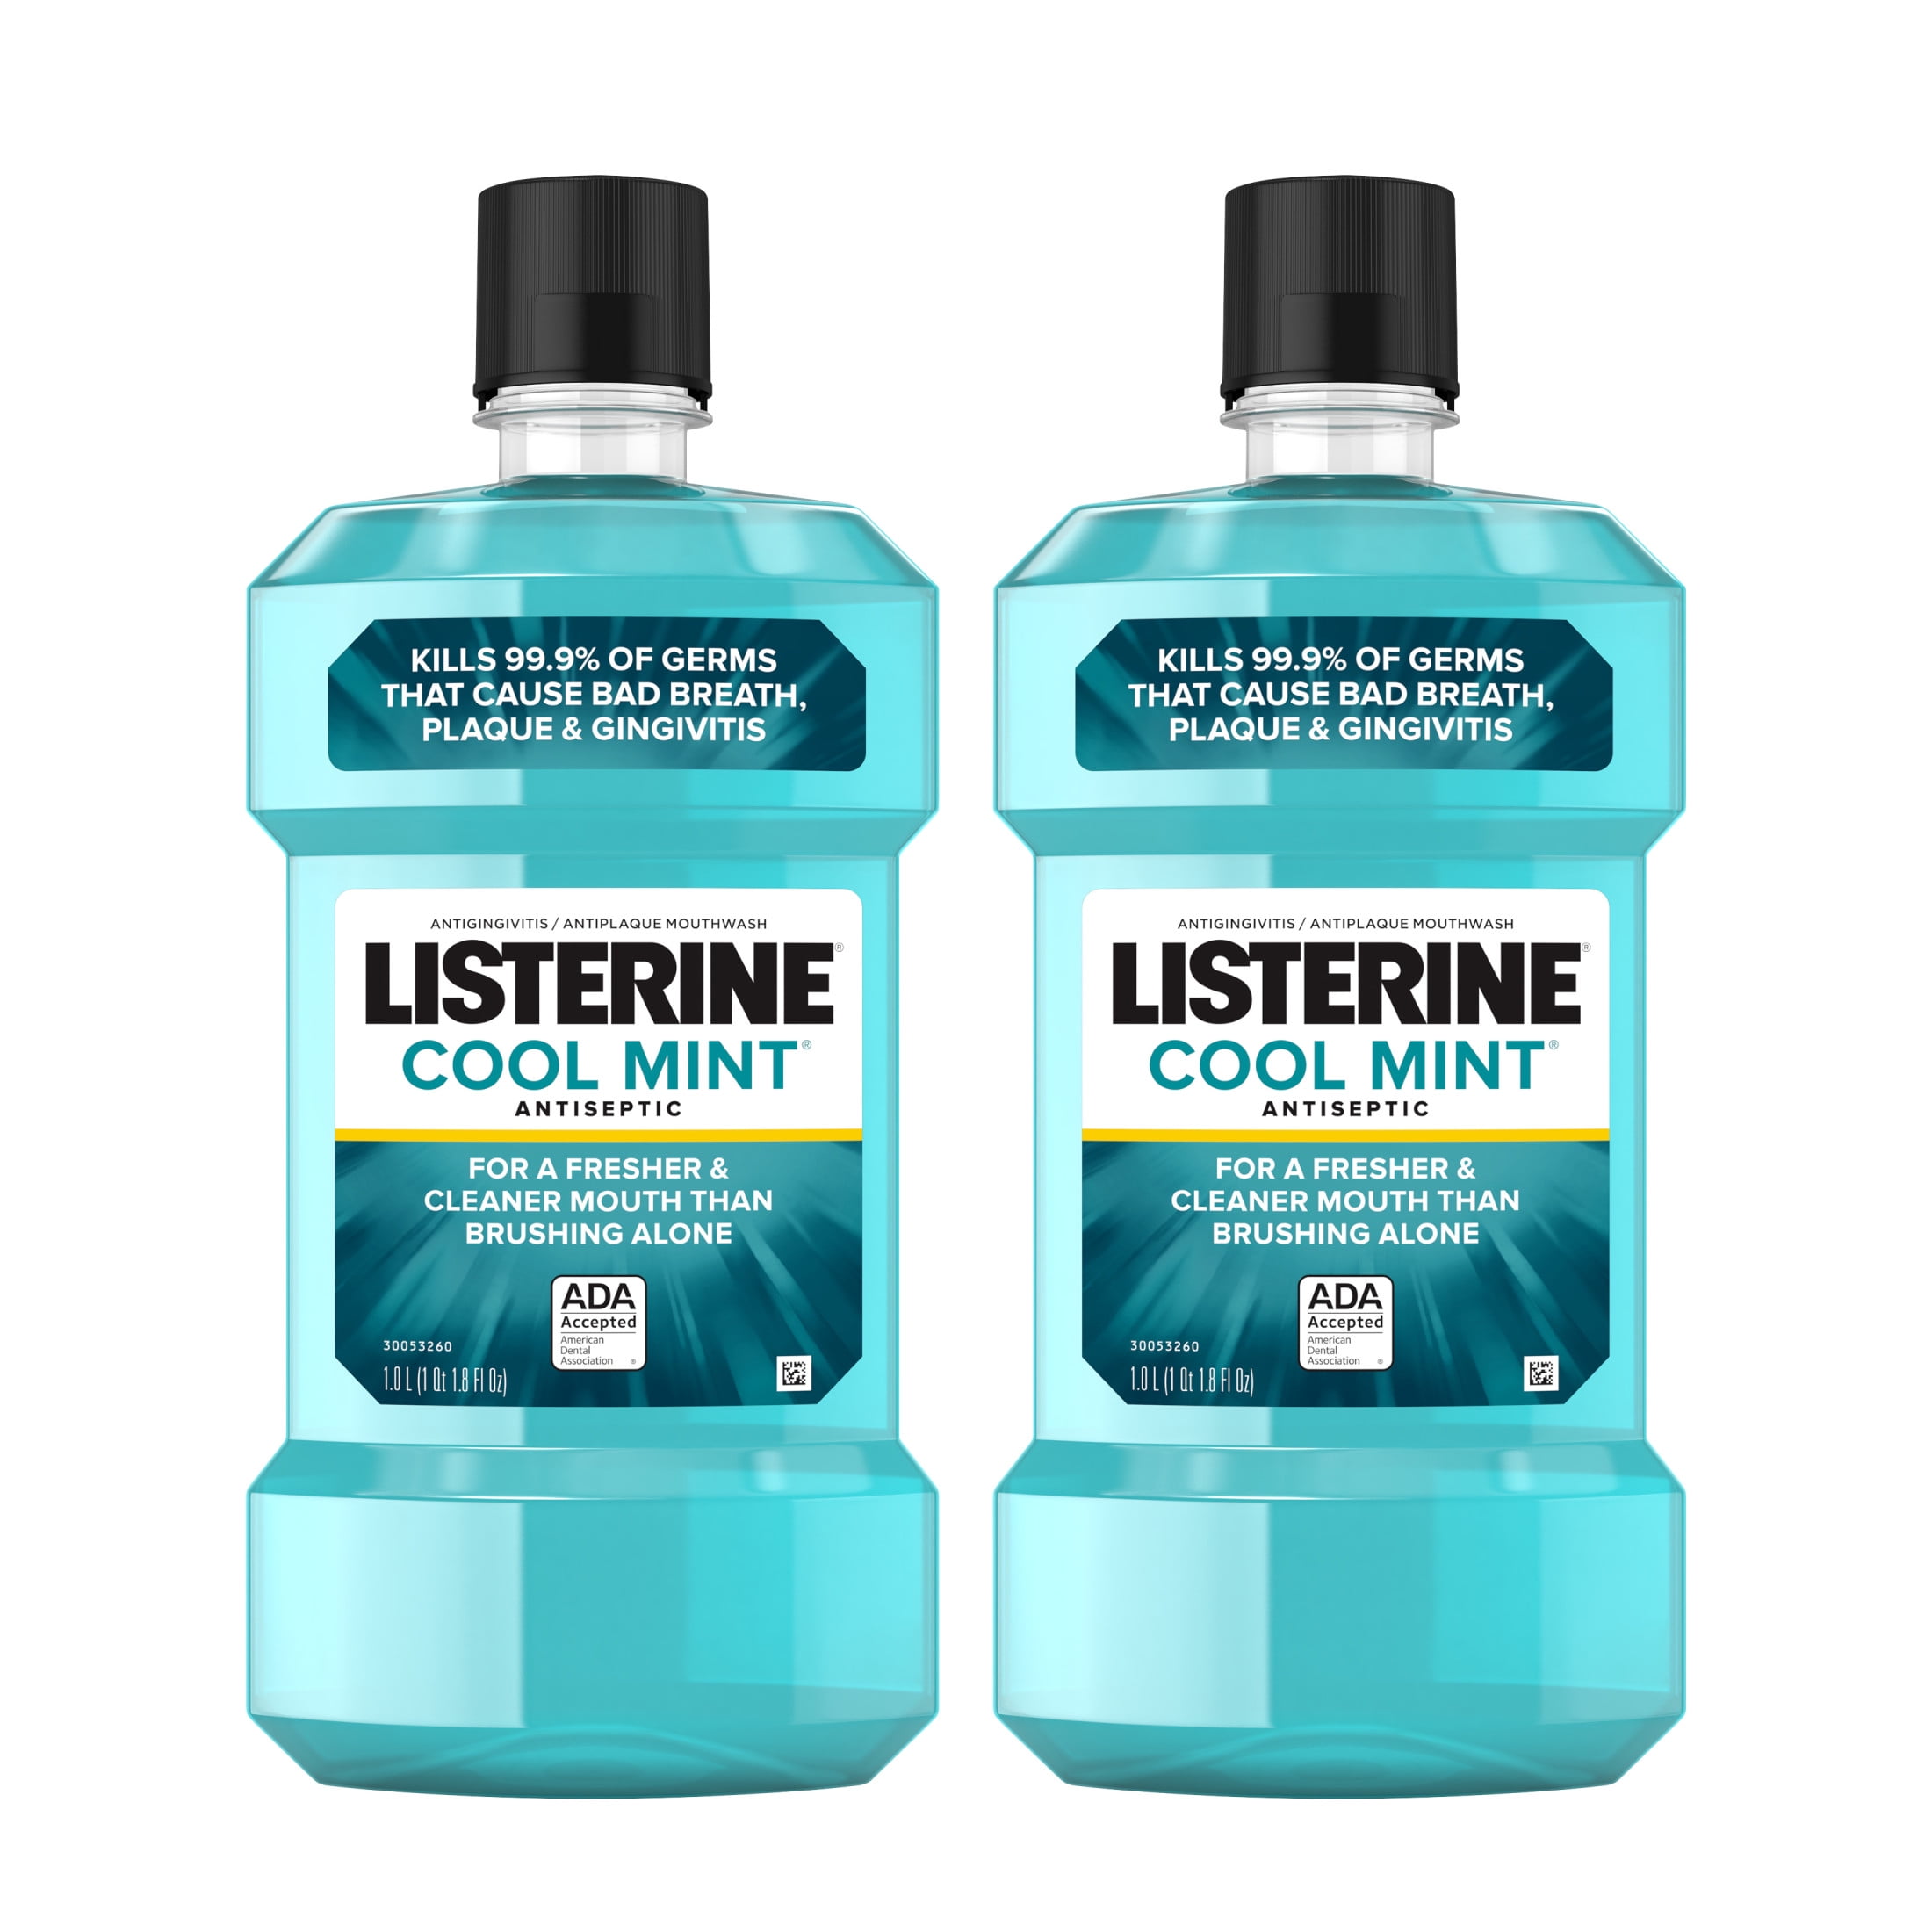 The Breath Co Alcohol Free Mouthwash Icy Mint - 500ml - Boots